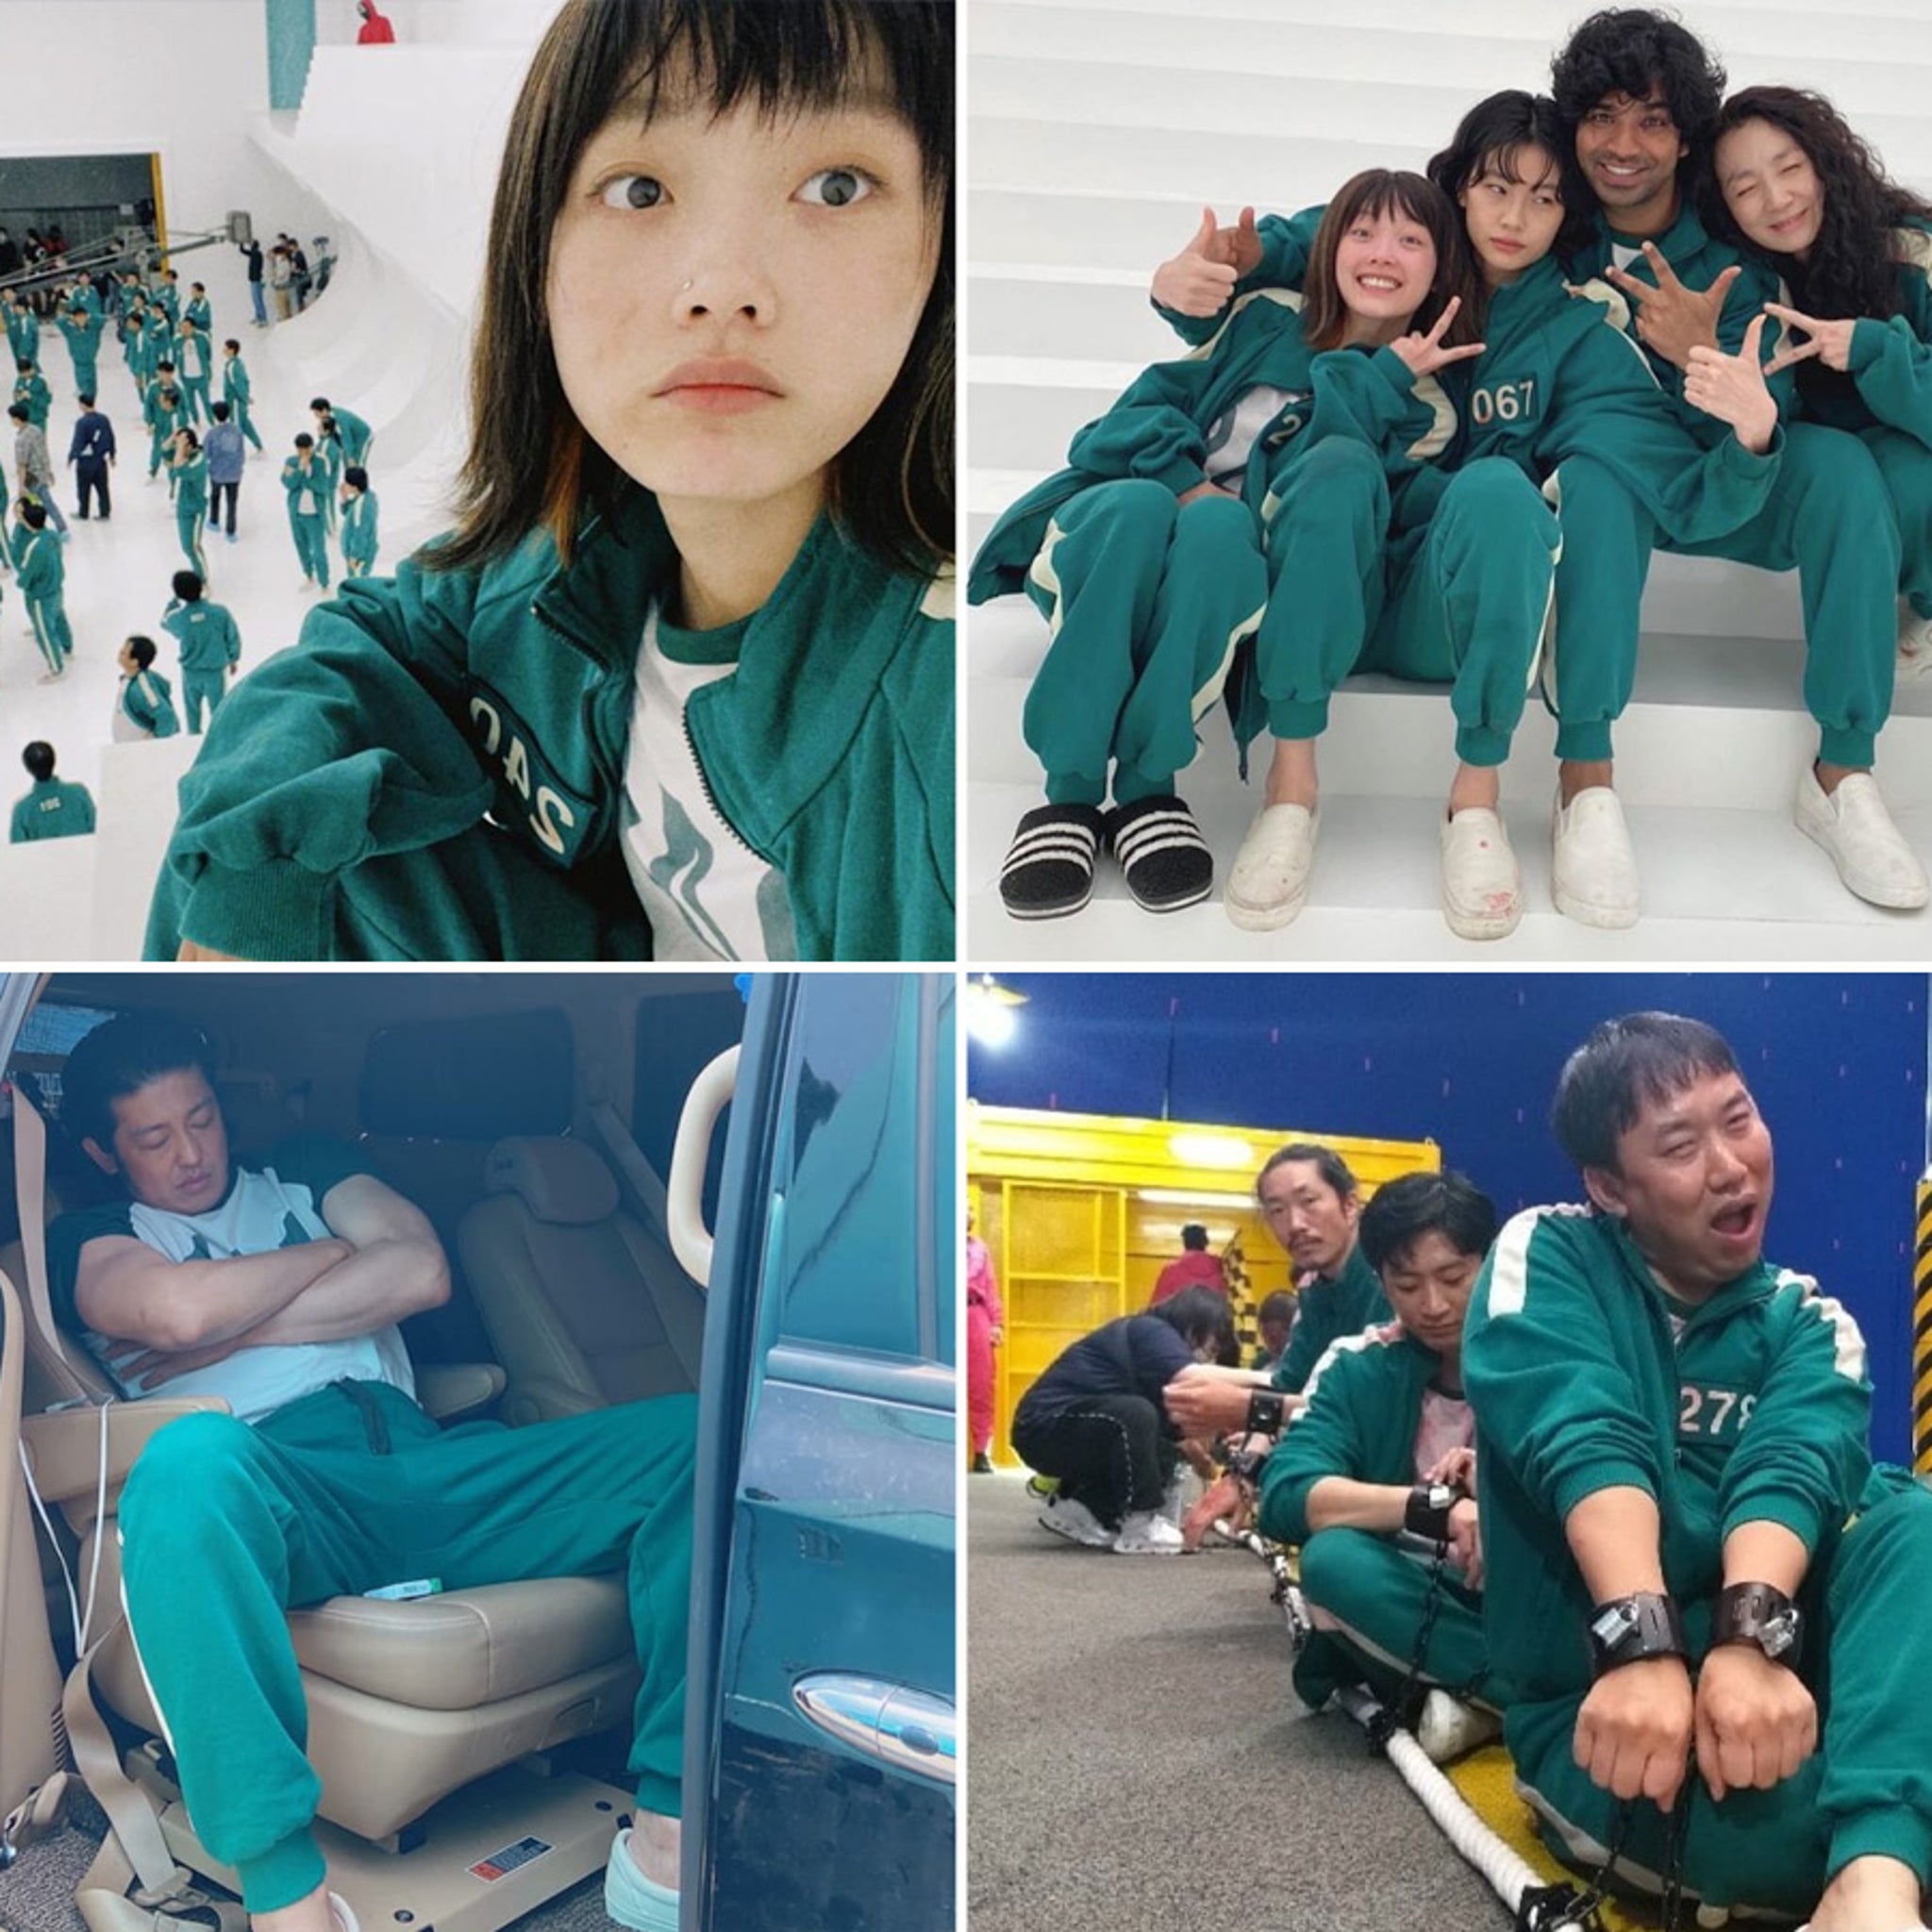 Behind-The-Scenes Photos Of The 'Squid Game' Cast